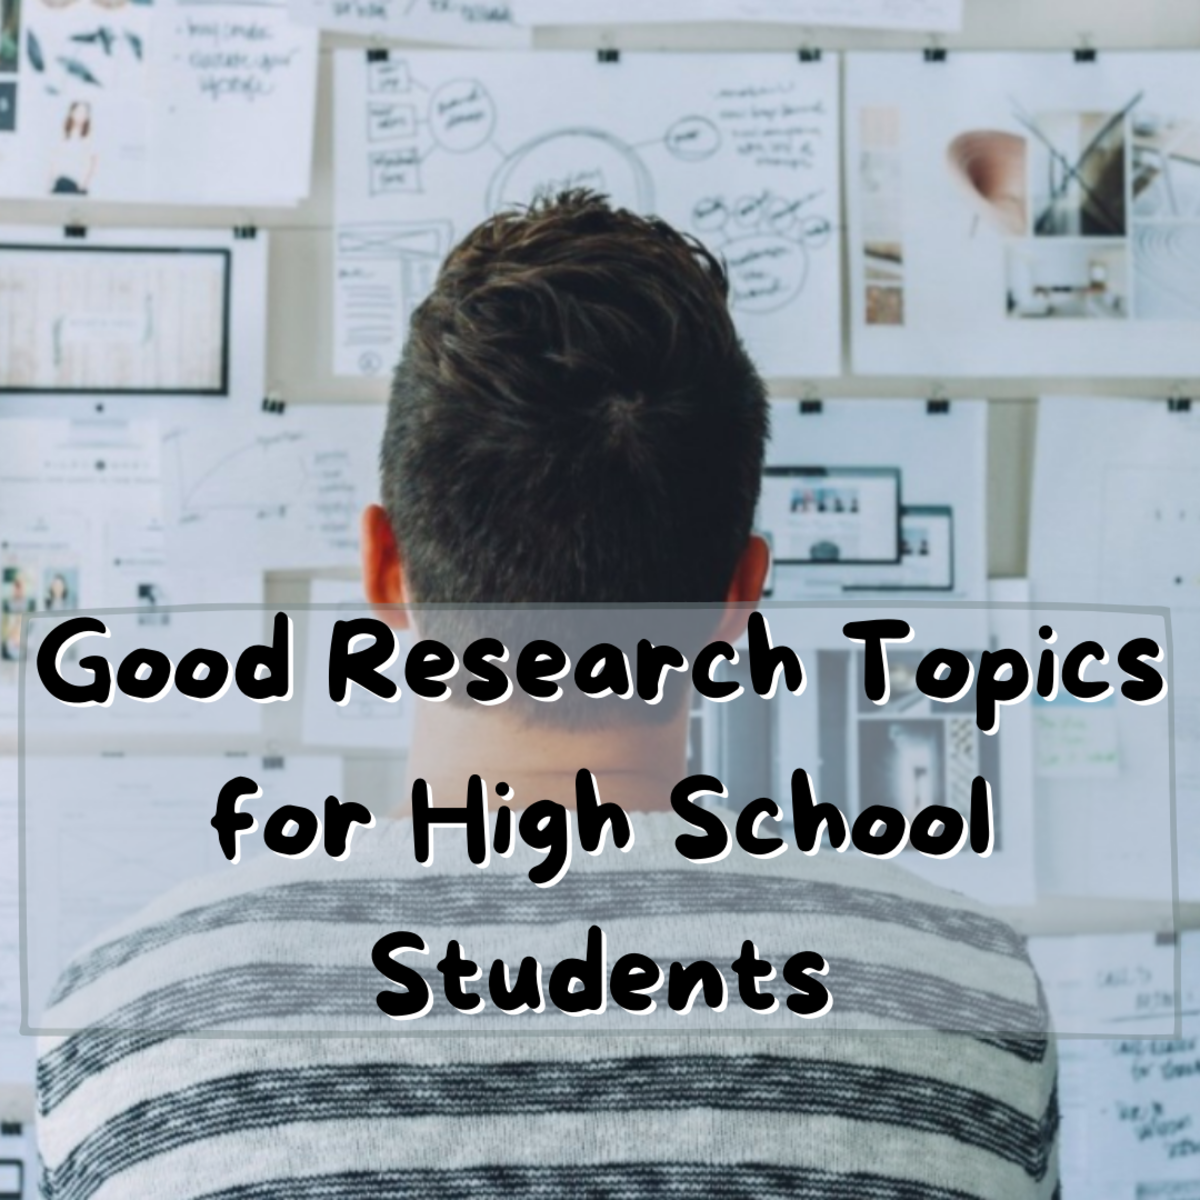 Good Research Topics for High School Students